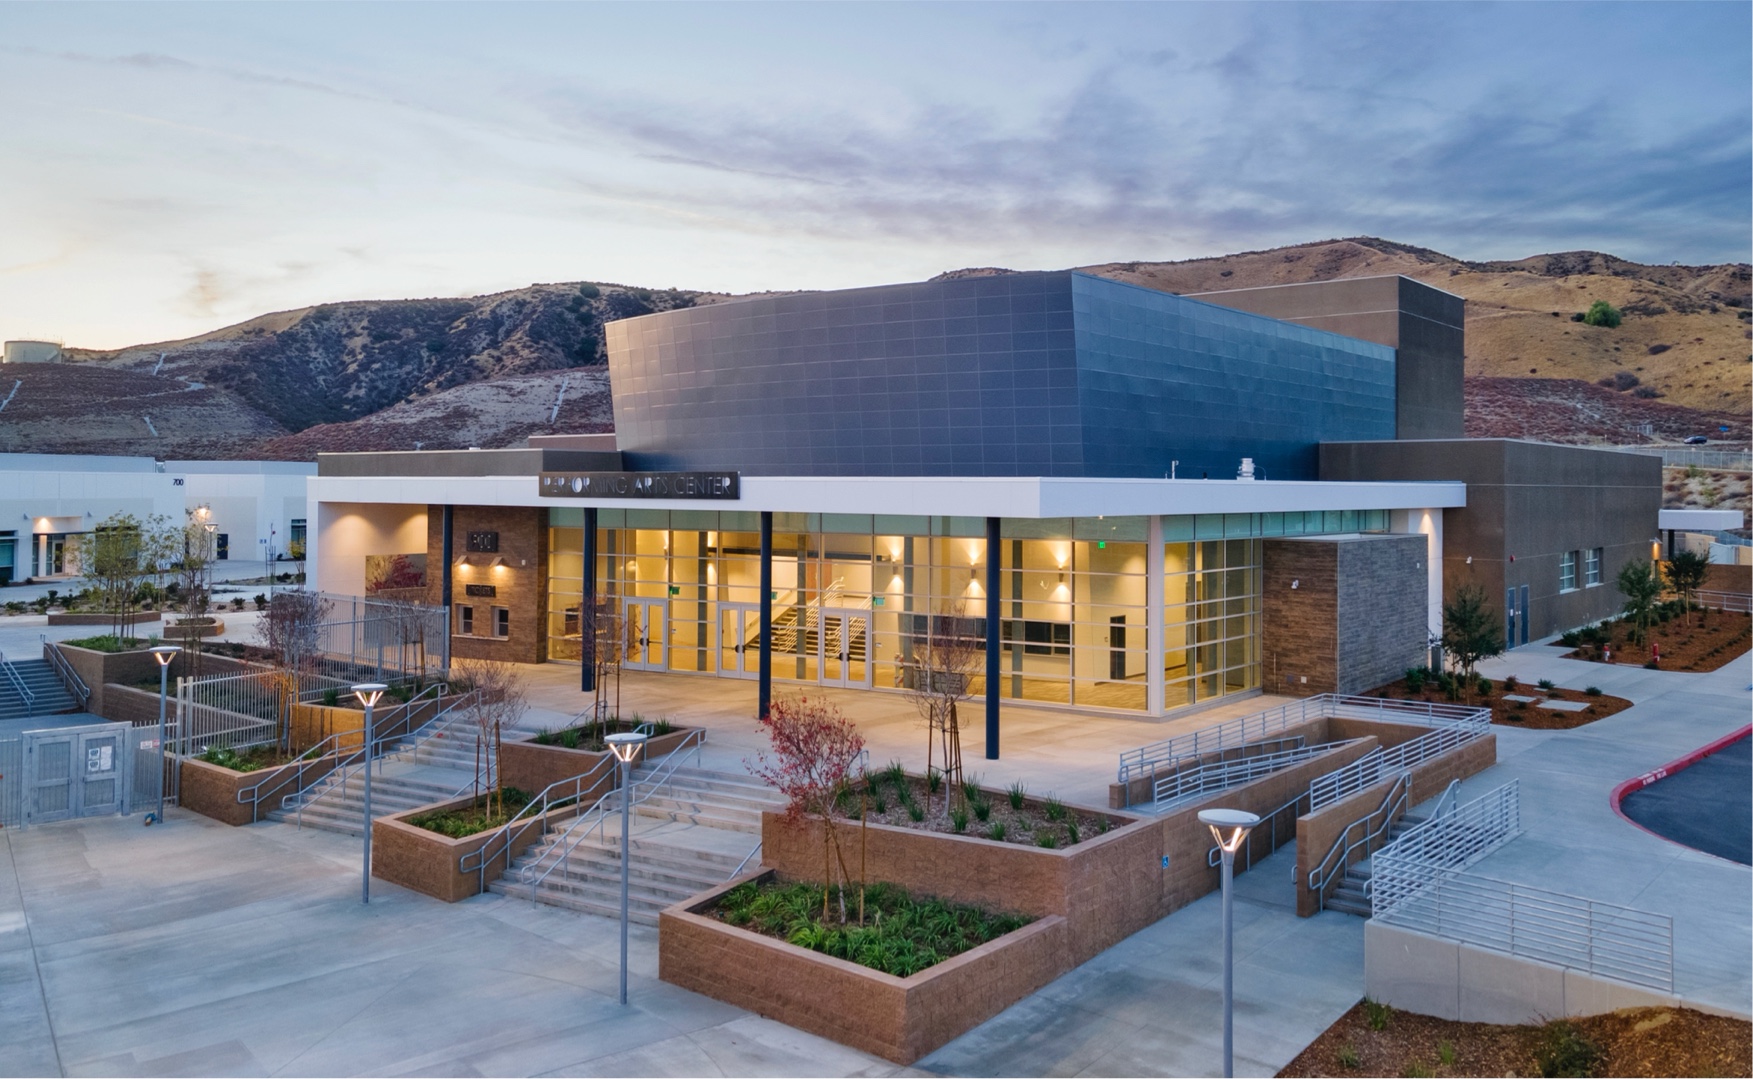 Completed: Castaic High School